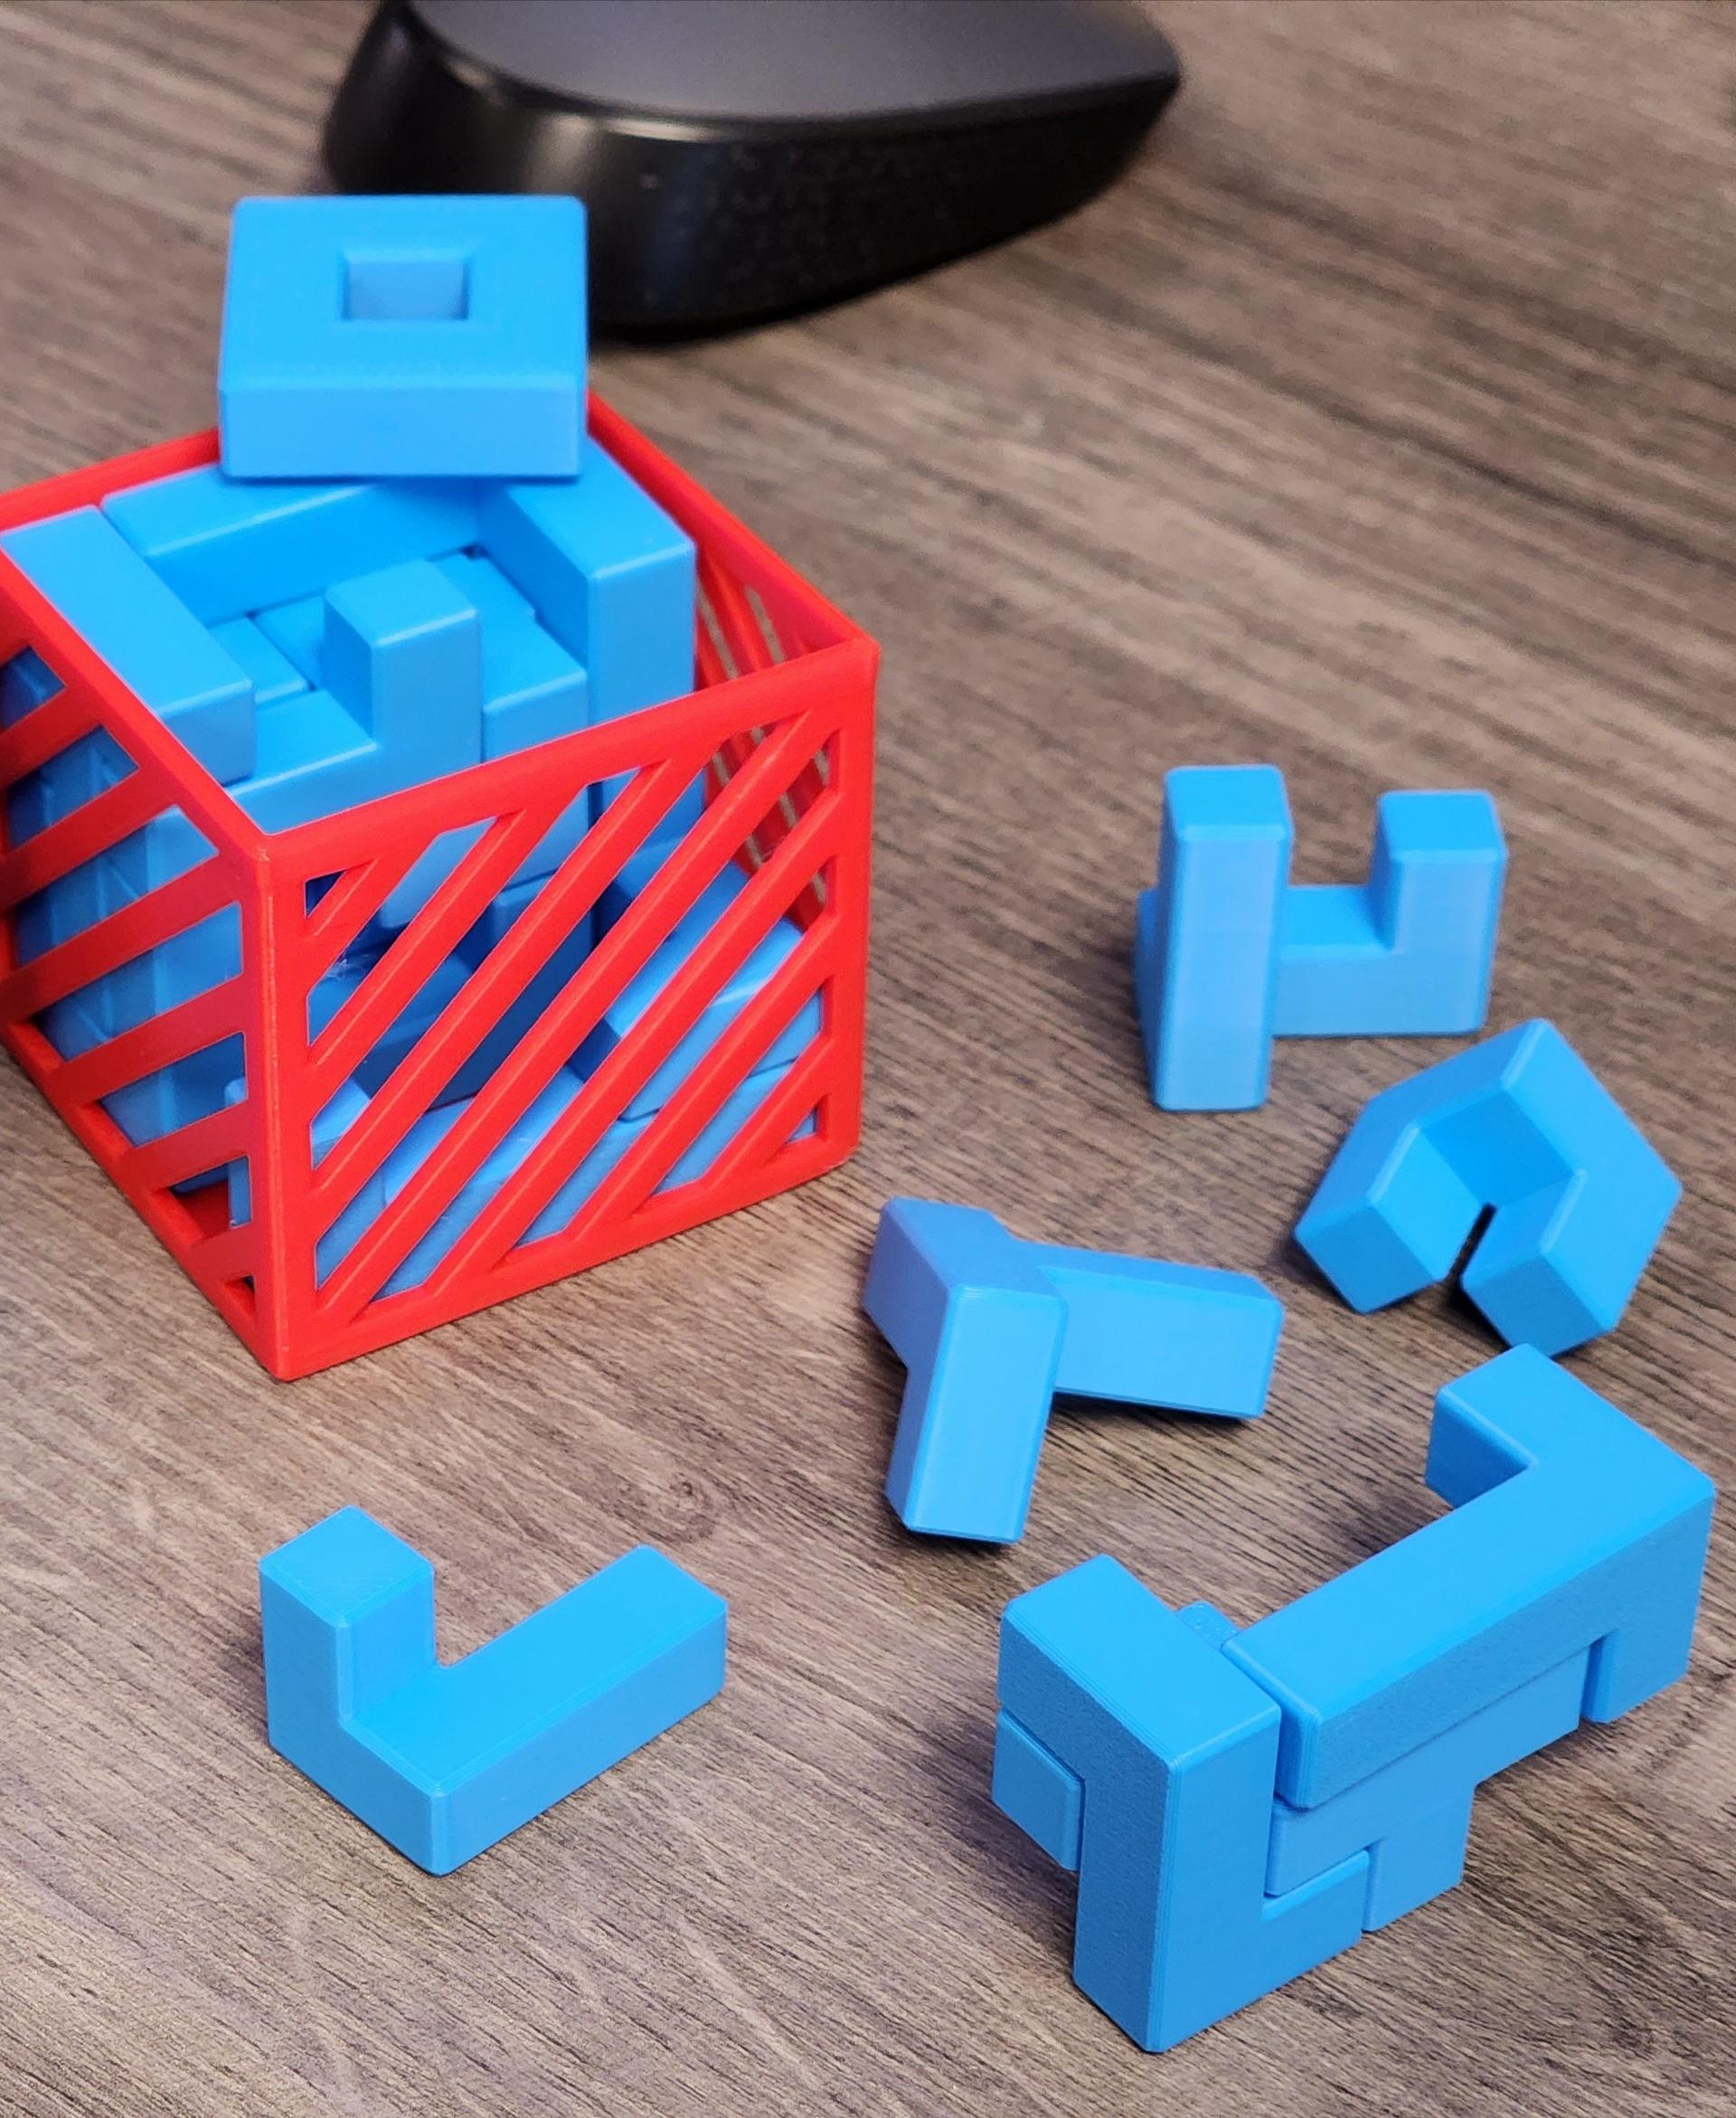 5x5 Puzzle Cube - I think I've been trolled. All the pieces were printed at once as they were imported. I can see no way to complete this puzzle. The "solution" is of moderate help as it only shows the outside. 
I quit. I'm calling this unsolvable.  - 3d model